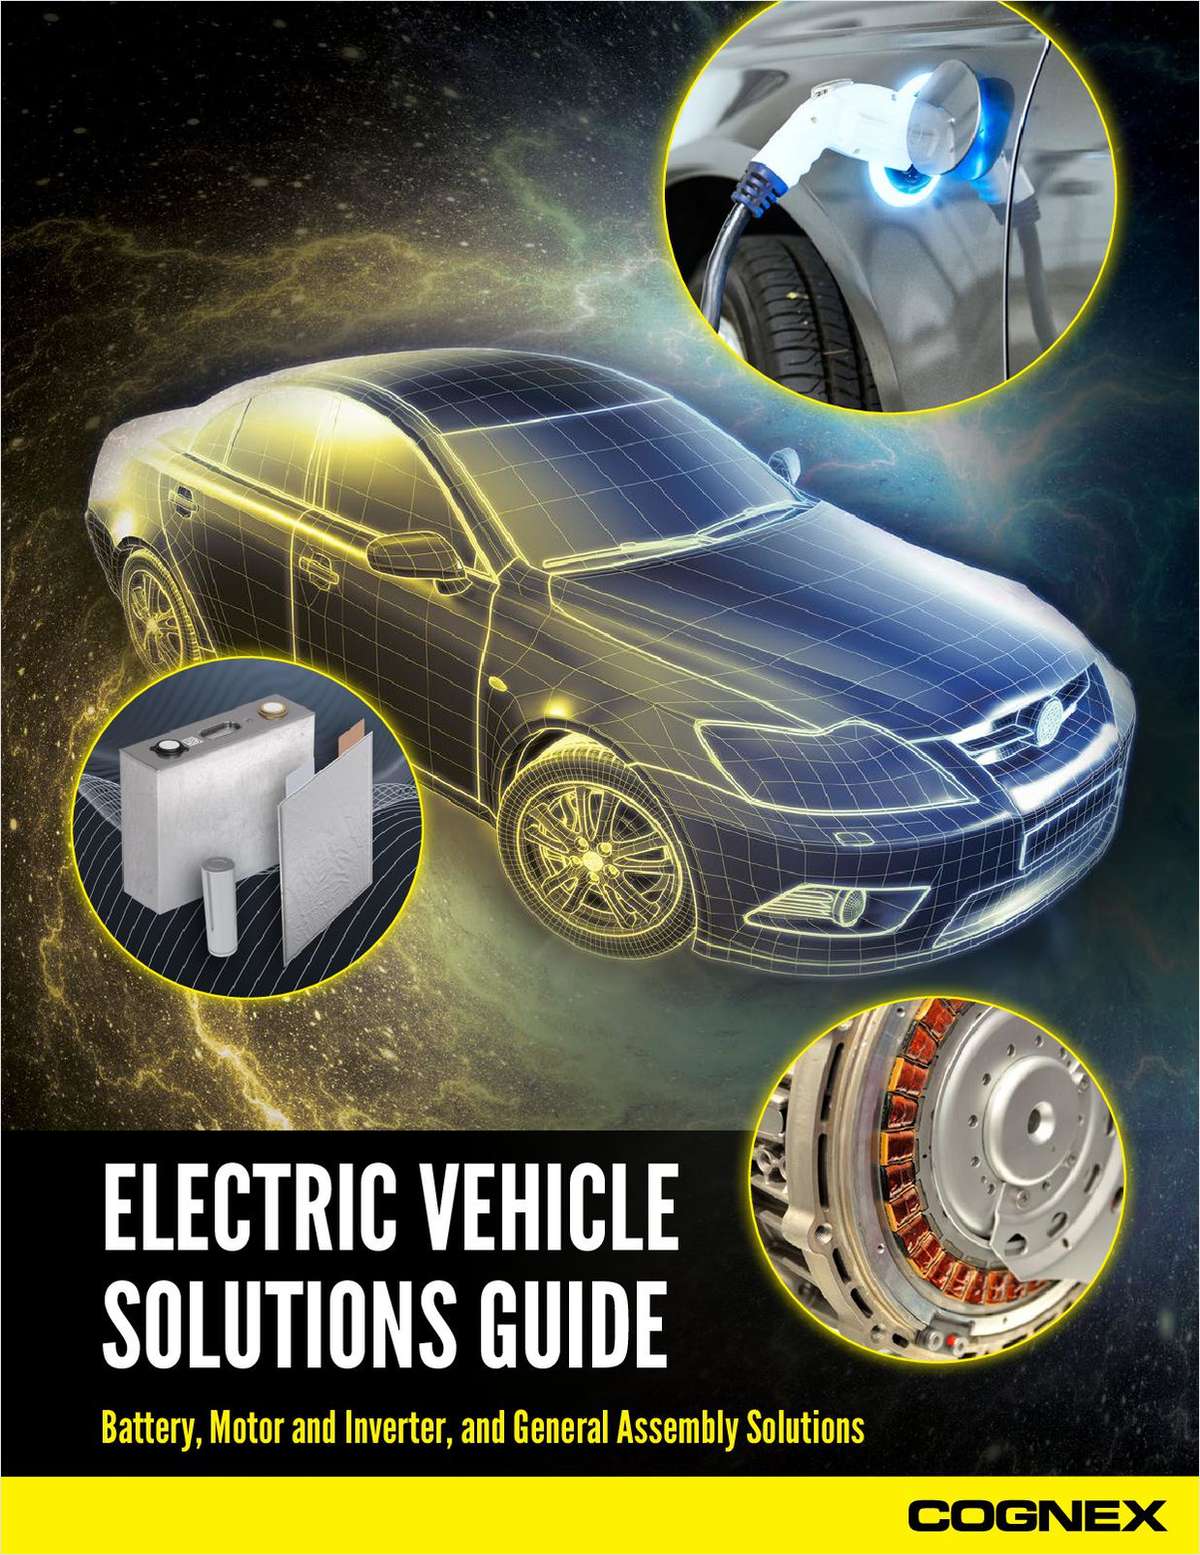 Machine Vision Guide for EVs and Components